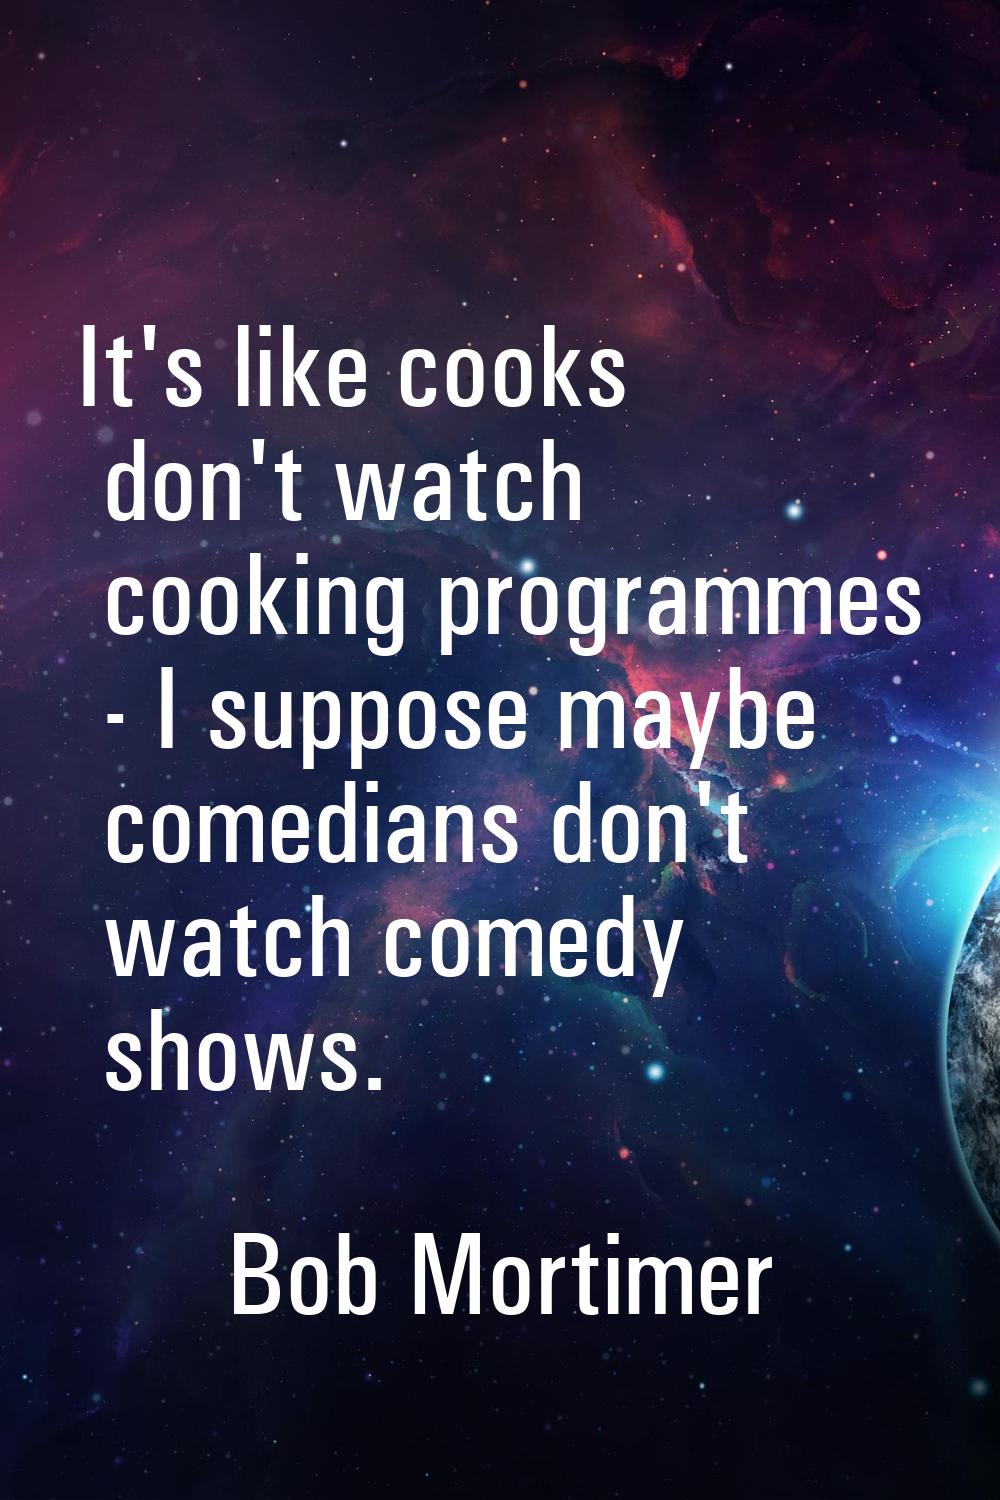 It's like cooks don't watch cooking programmes - I suppose maybe comedians don't watch comedy shows